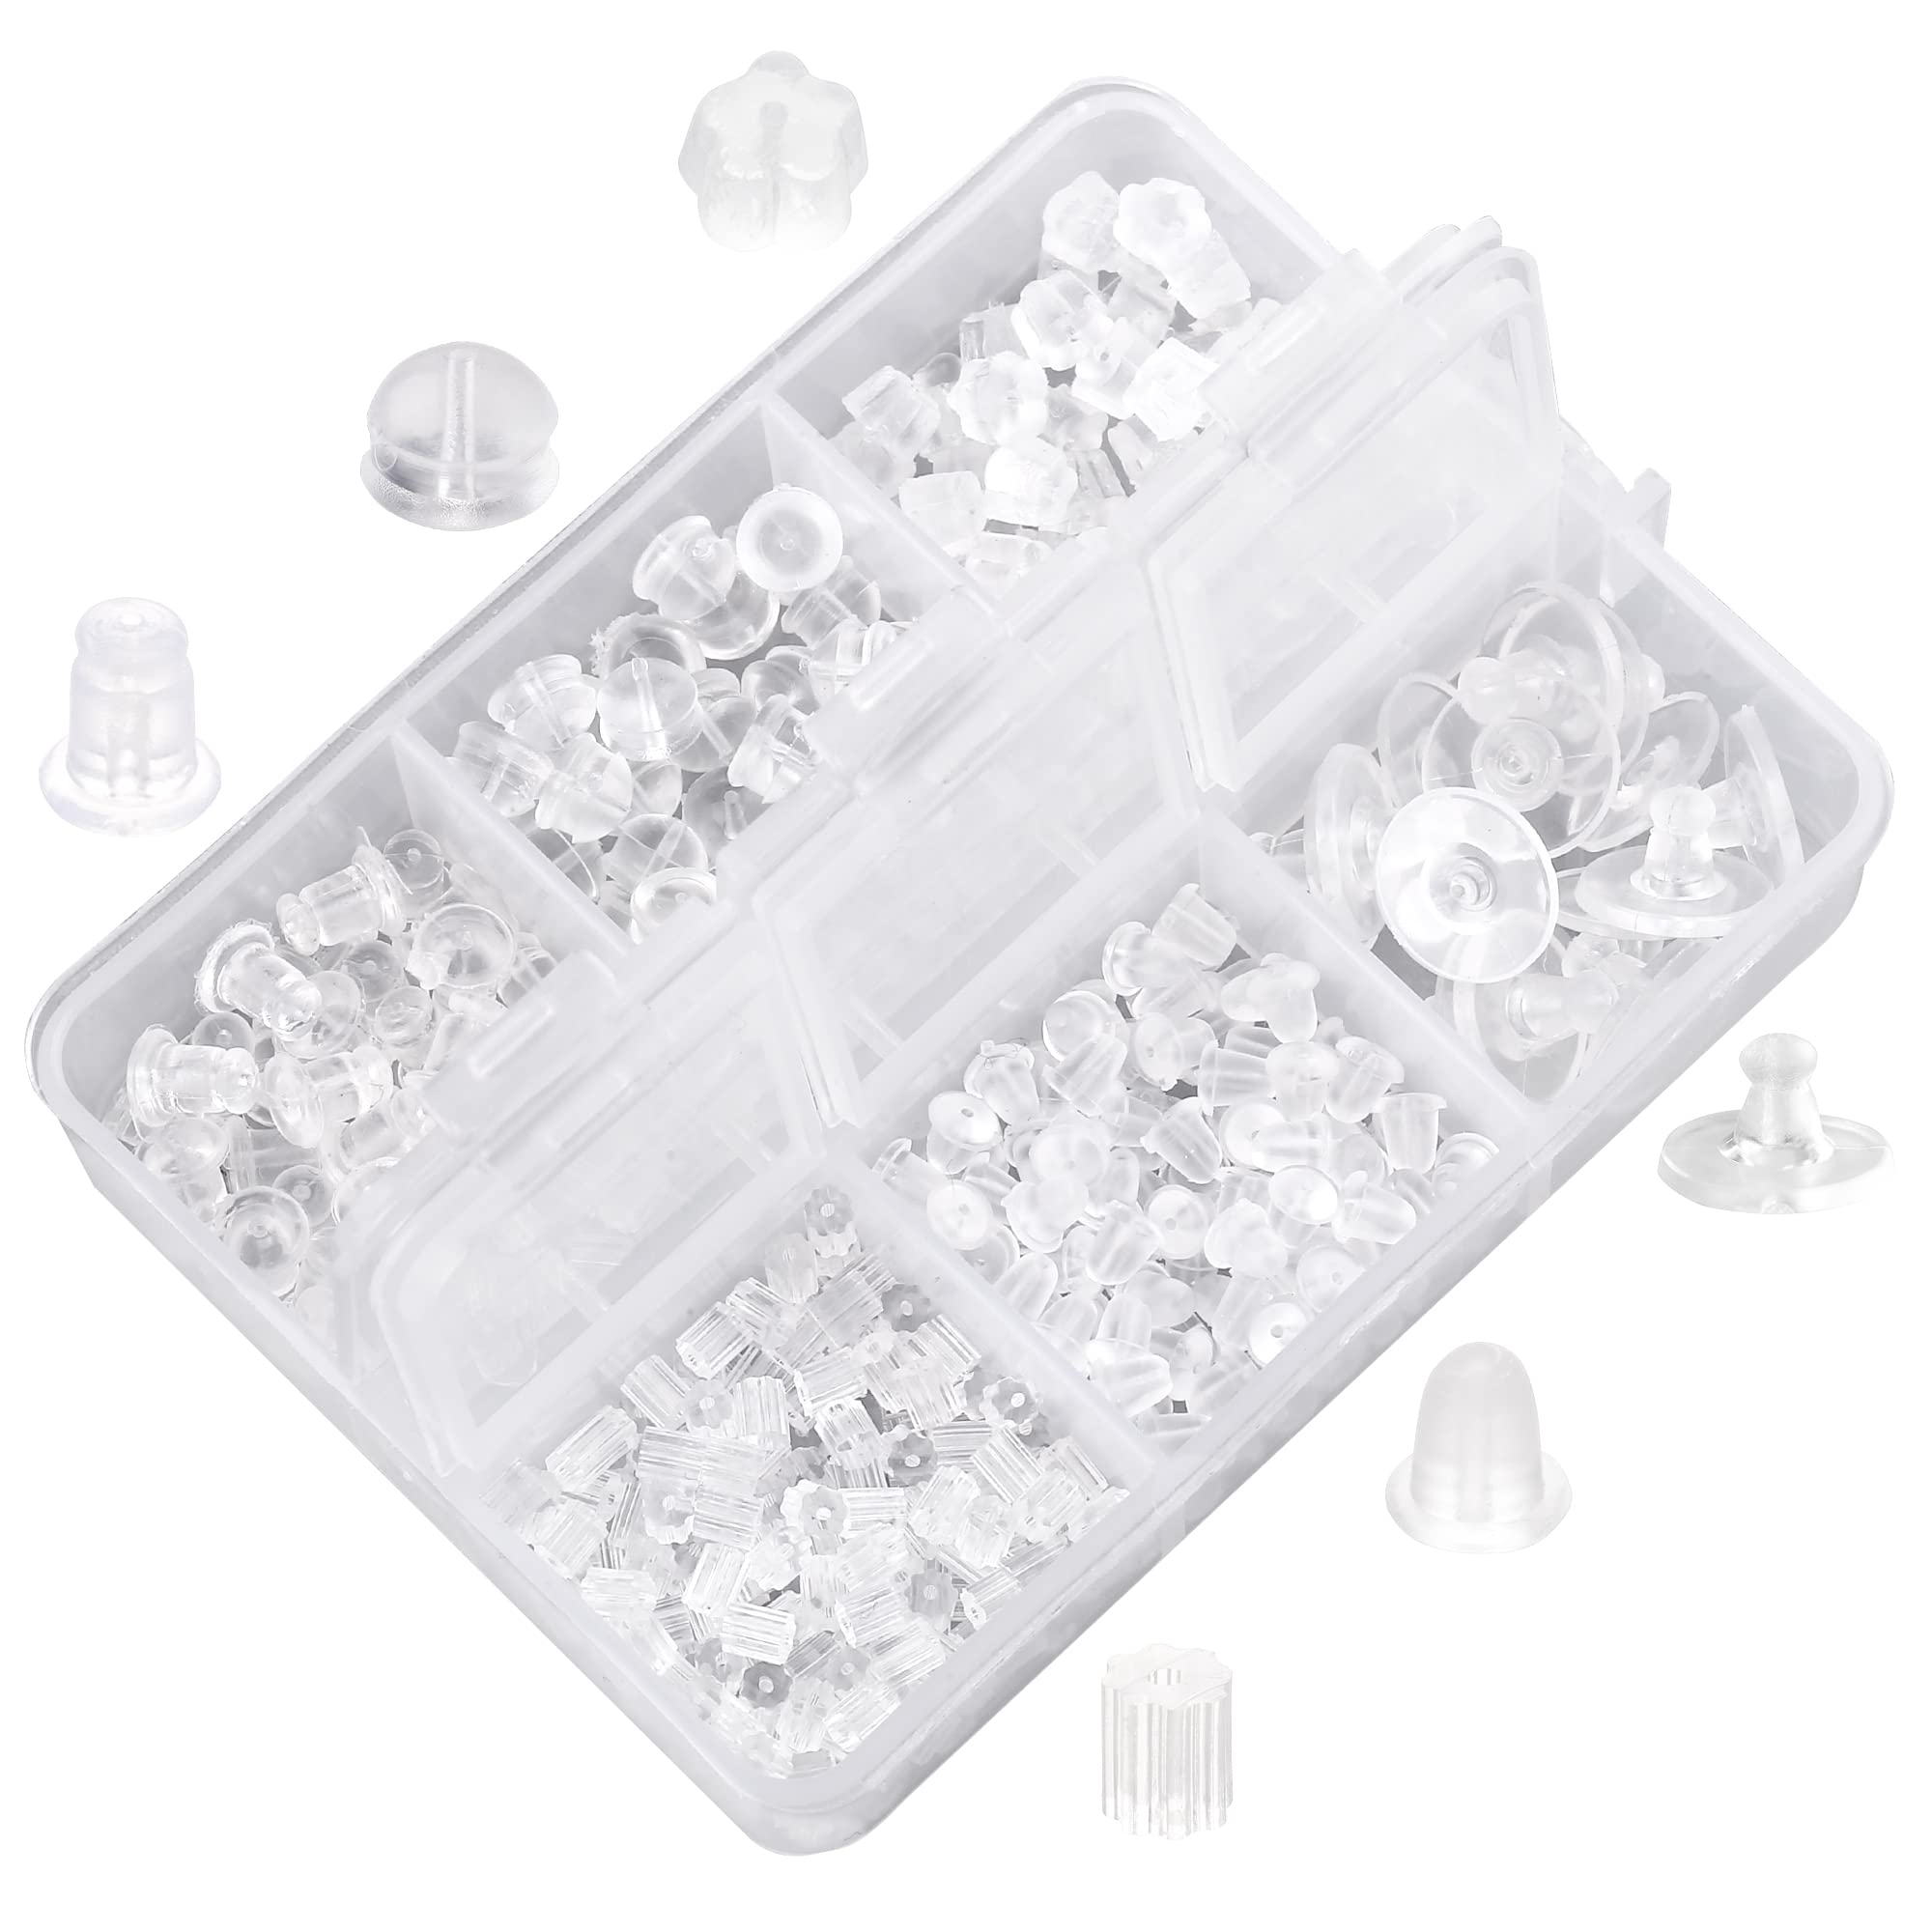 100 Pcs Clear Silicone Earring Backs Hypoallergenic Secure Push-Back  Earring Stoppers for Stud Earrings, 10x6mm Full-Cover Studs